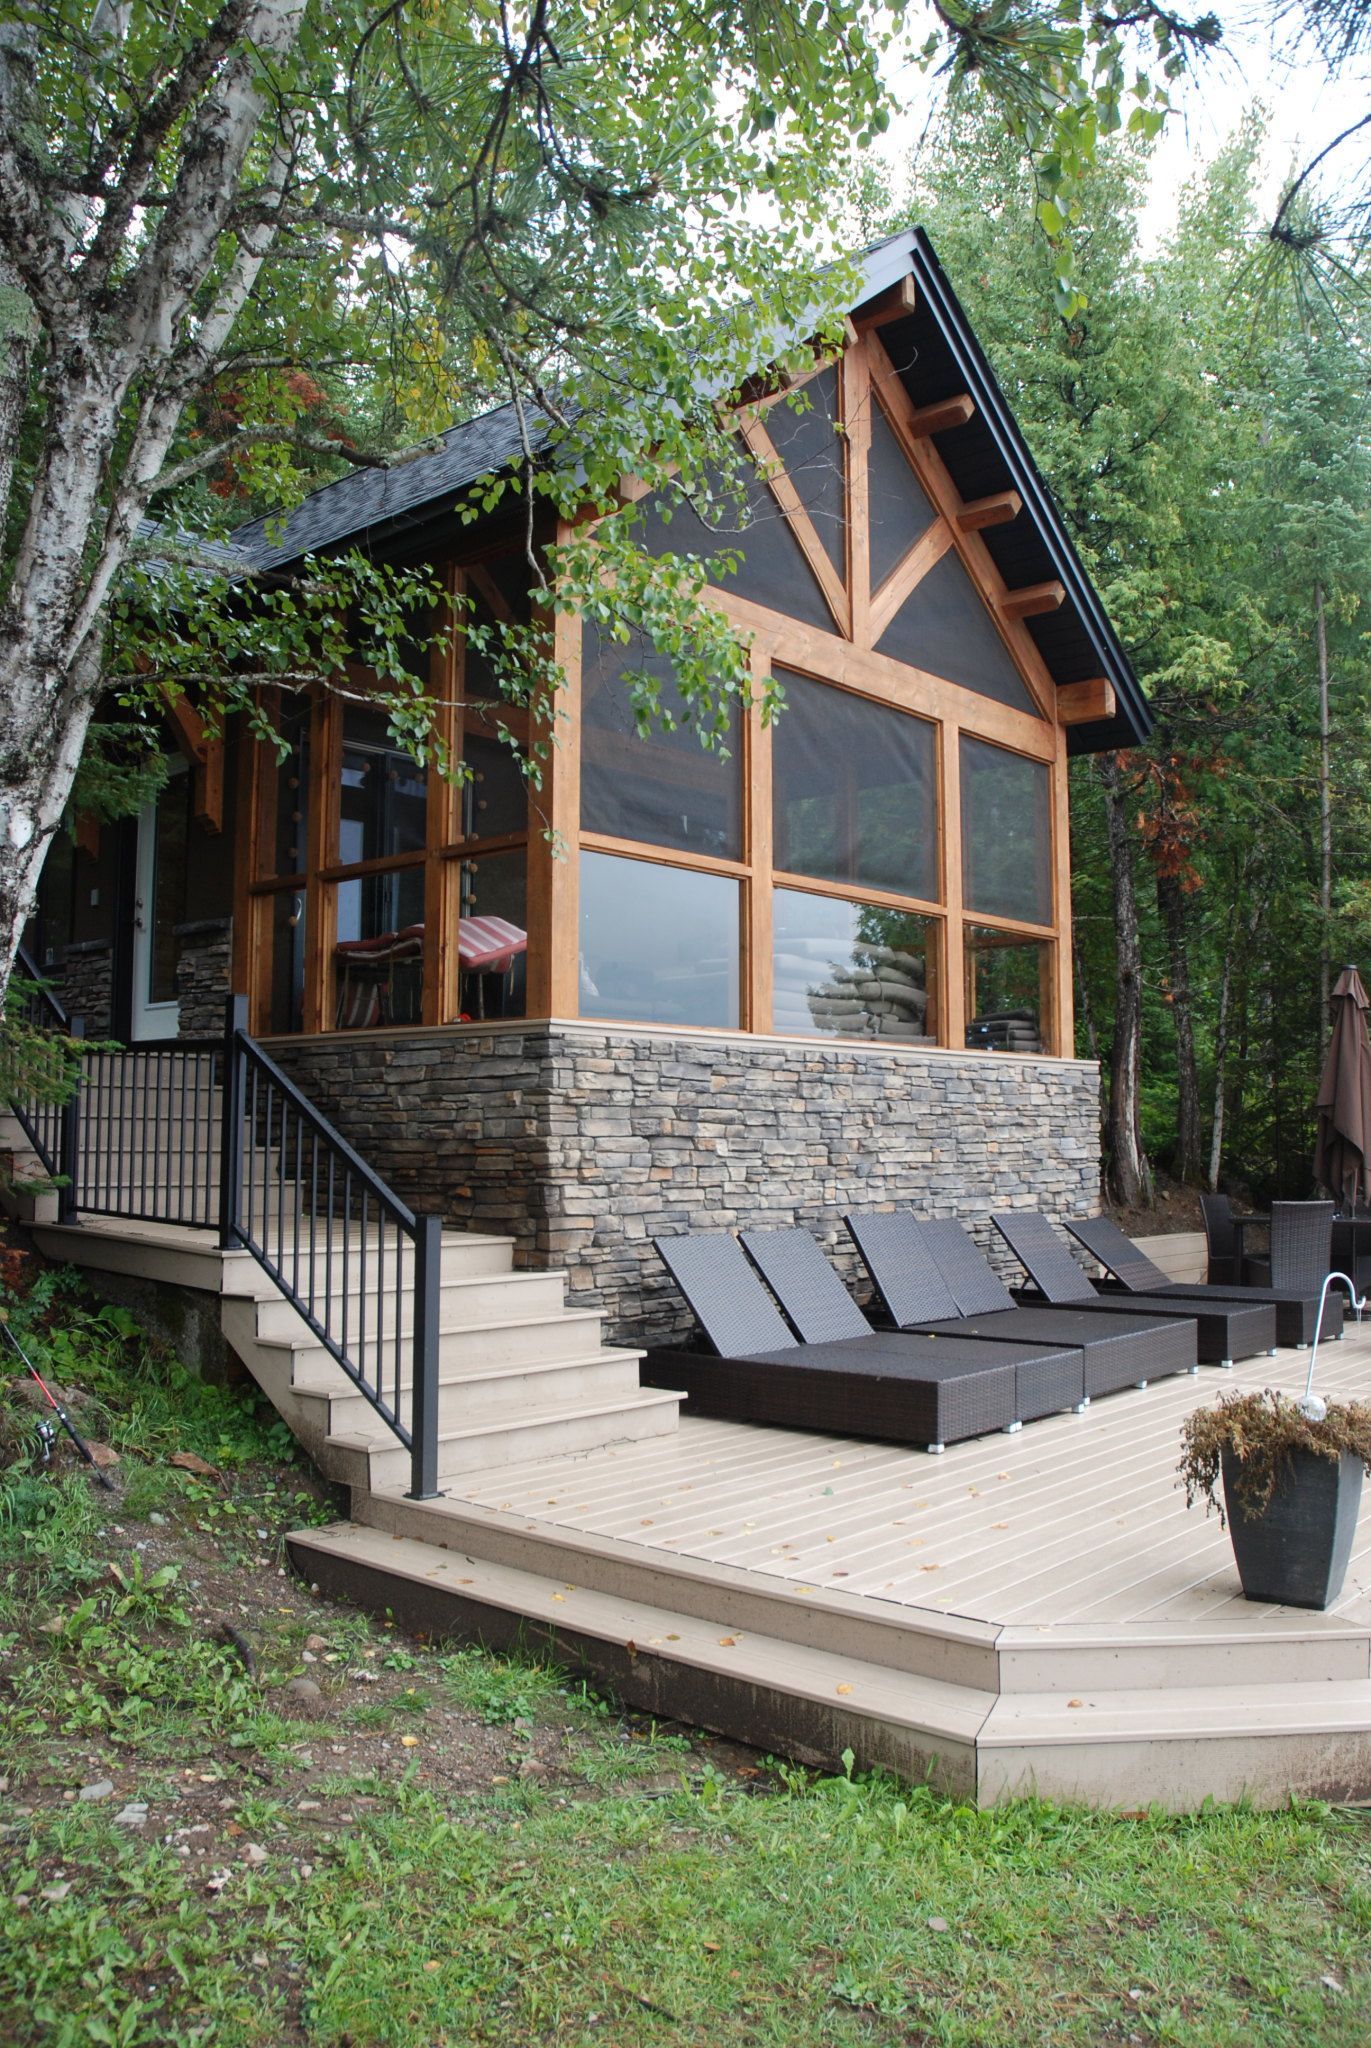 Enhance Your Outdoor Living Space with a Beautiful Screened-In Porch on Your Deck